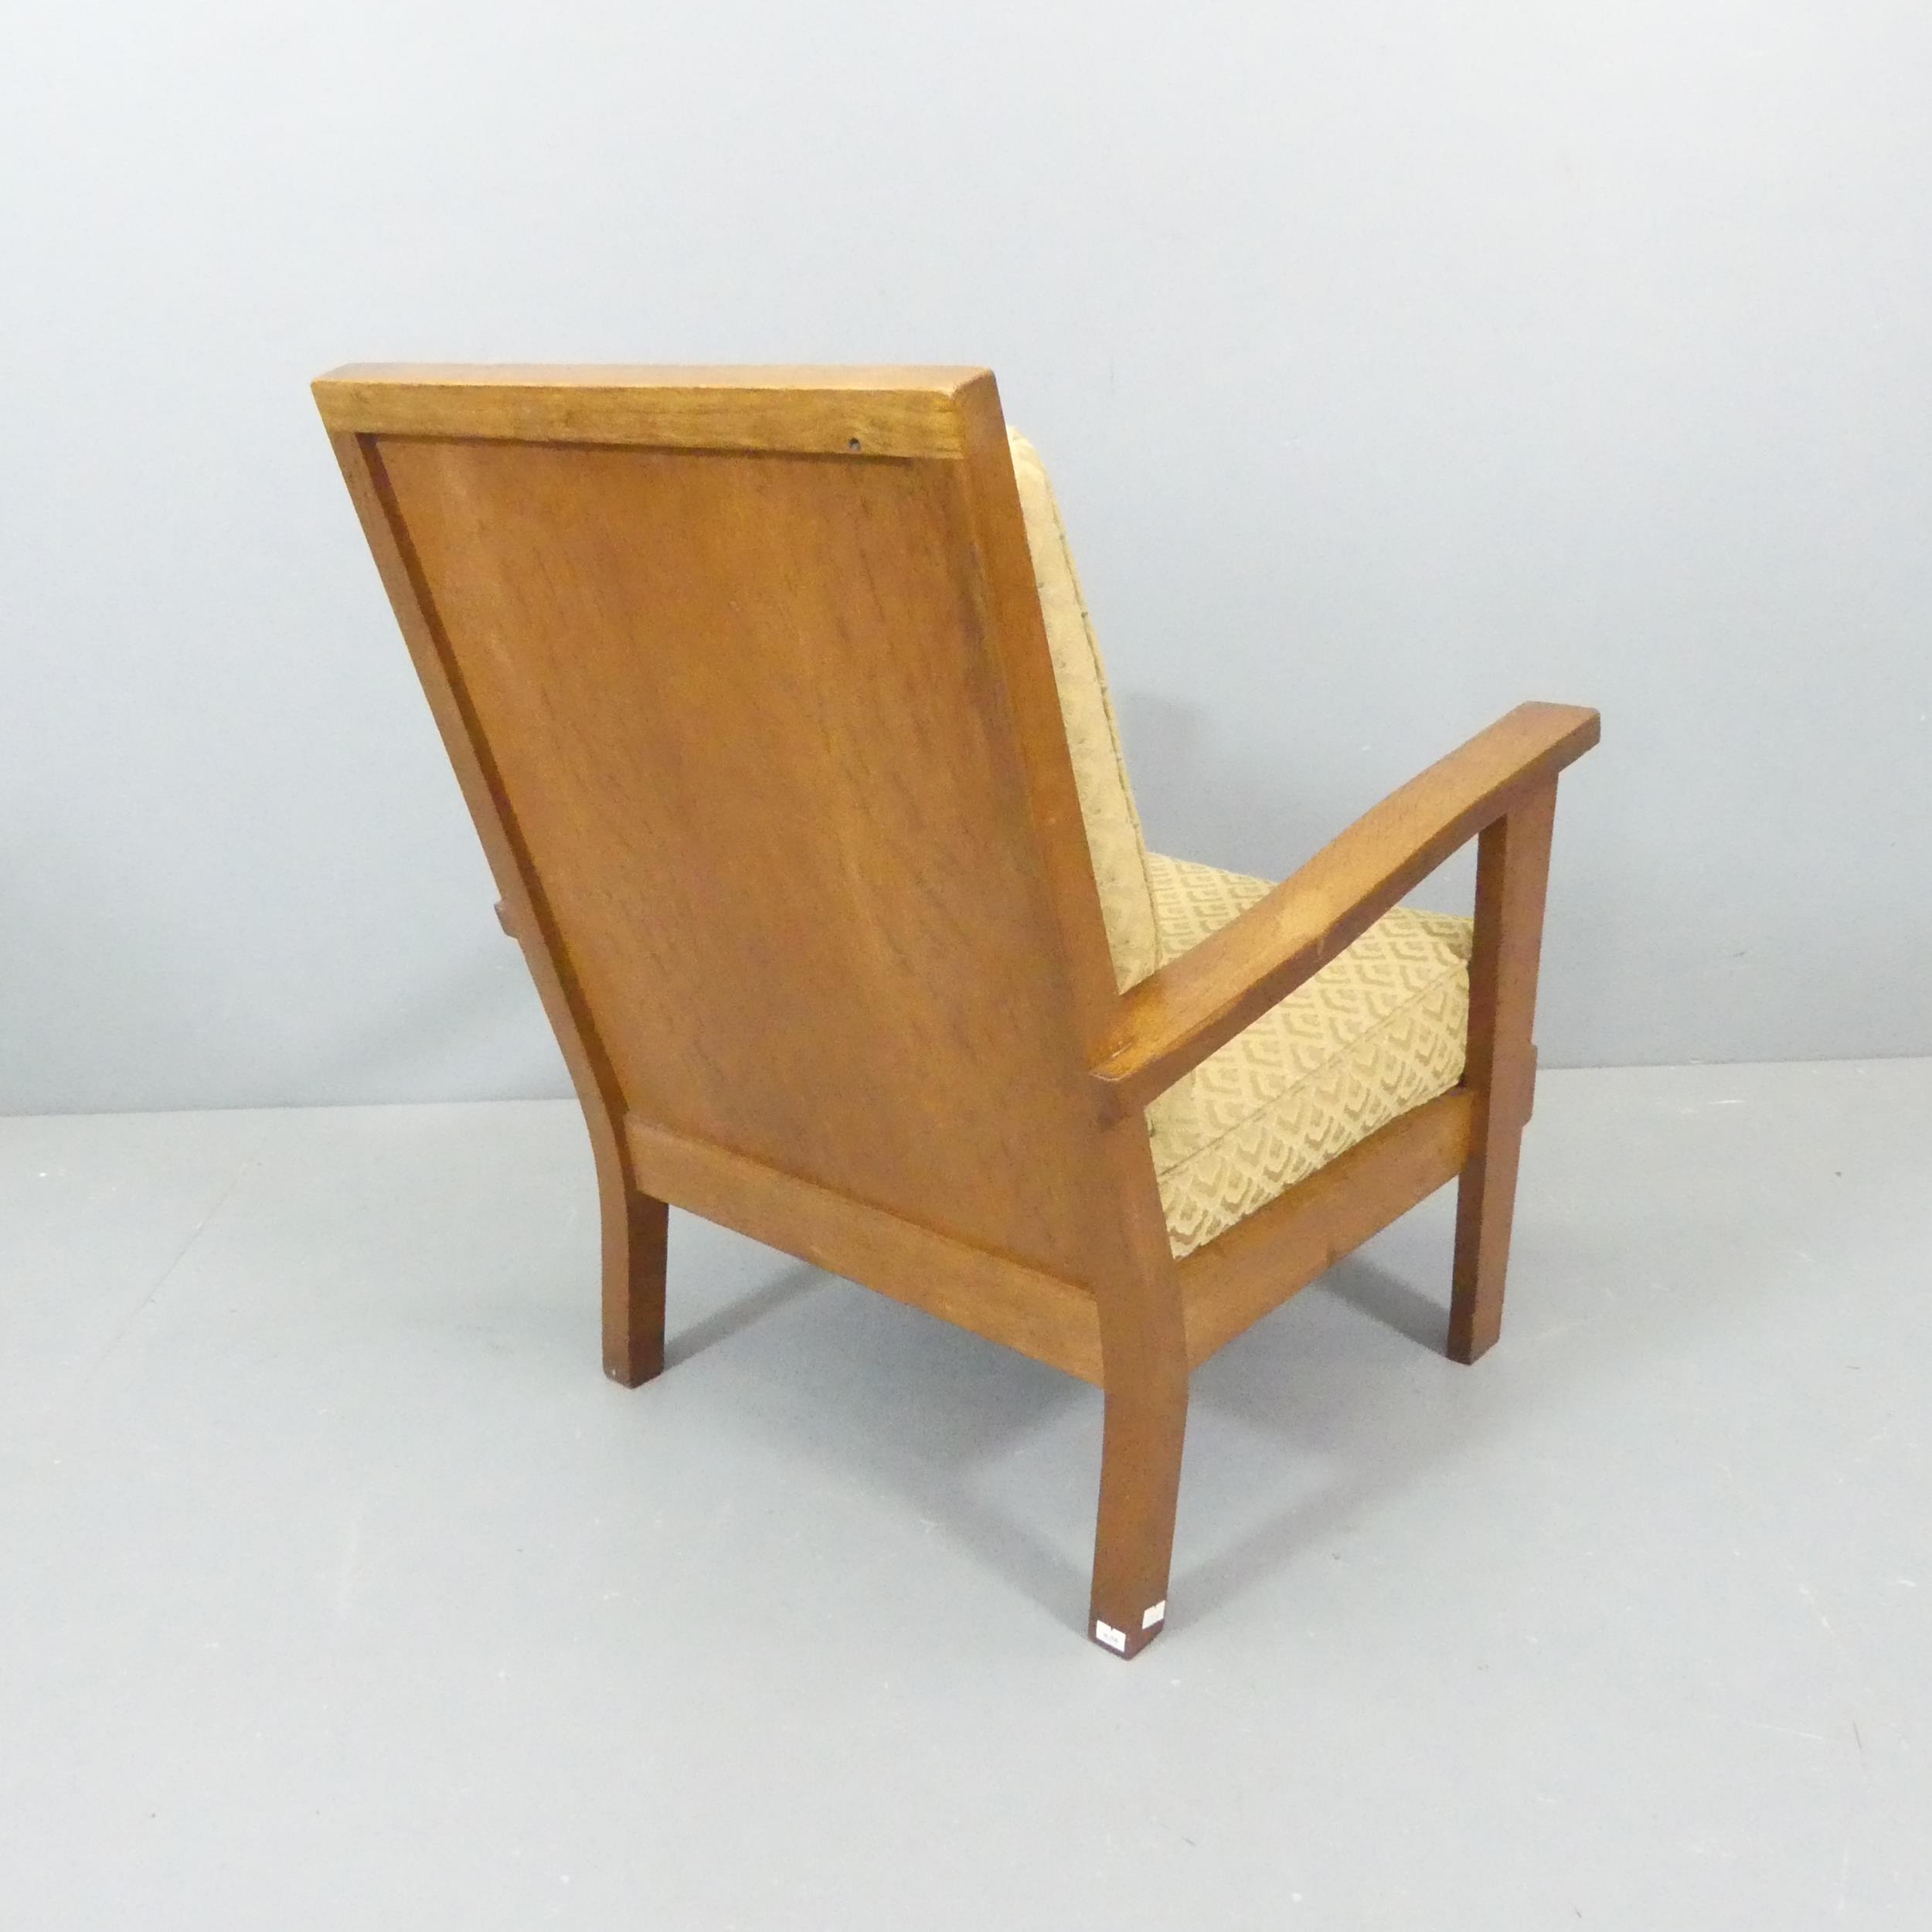 A Brynmawr Furniture Makers oak Arts & Crafts fireside chair, circa 1935, with provenance The - Image 2 of 2